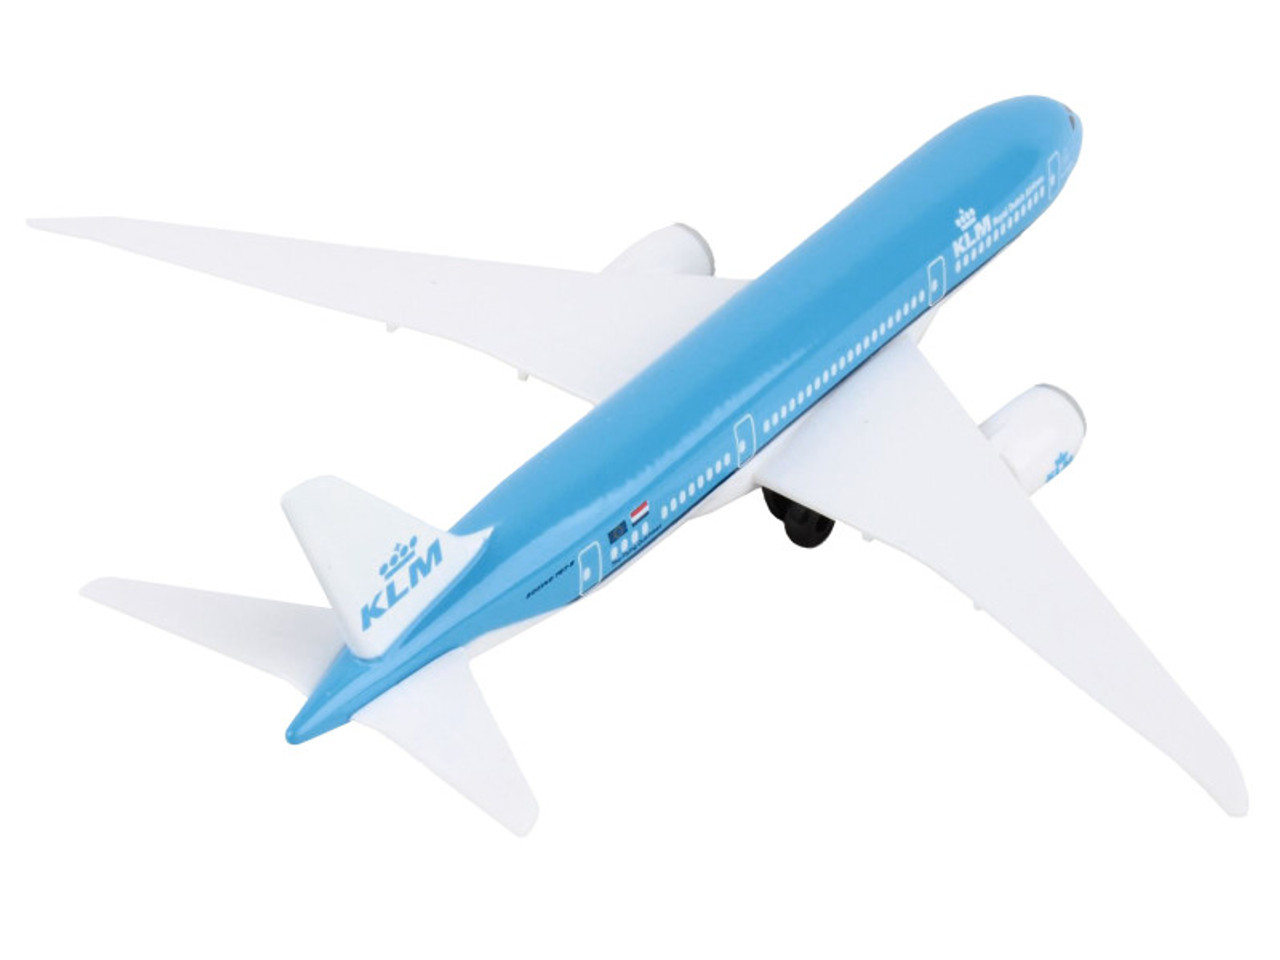 Boeing 787-9 Commercial Aircraft "KLM Royal Dutch Airlines" Blue with White Tail Diecast Model Airplane by Daron